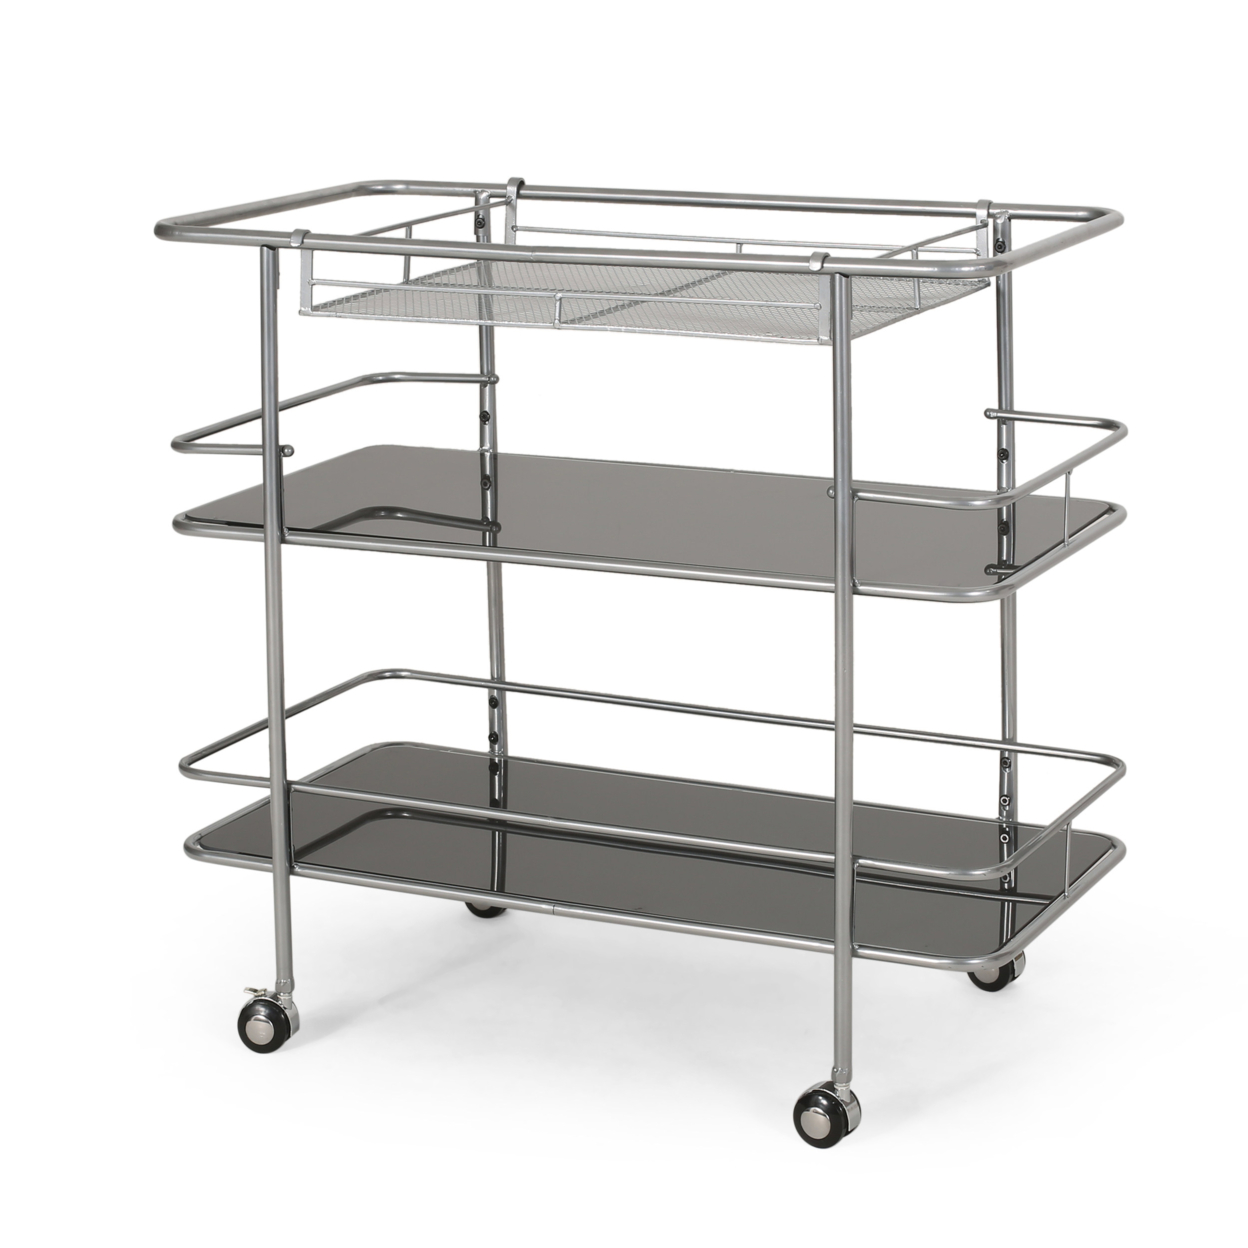 Galata Modern 3 Tier Bar Cart With Glass Shelving, Silver And Black